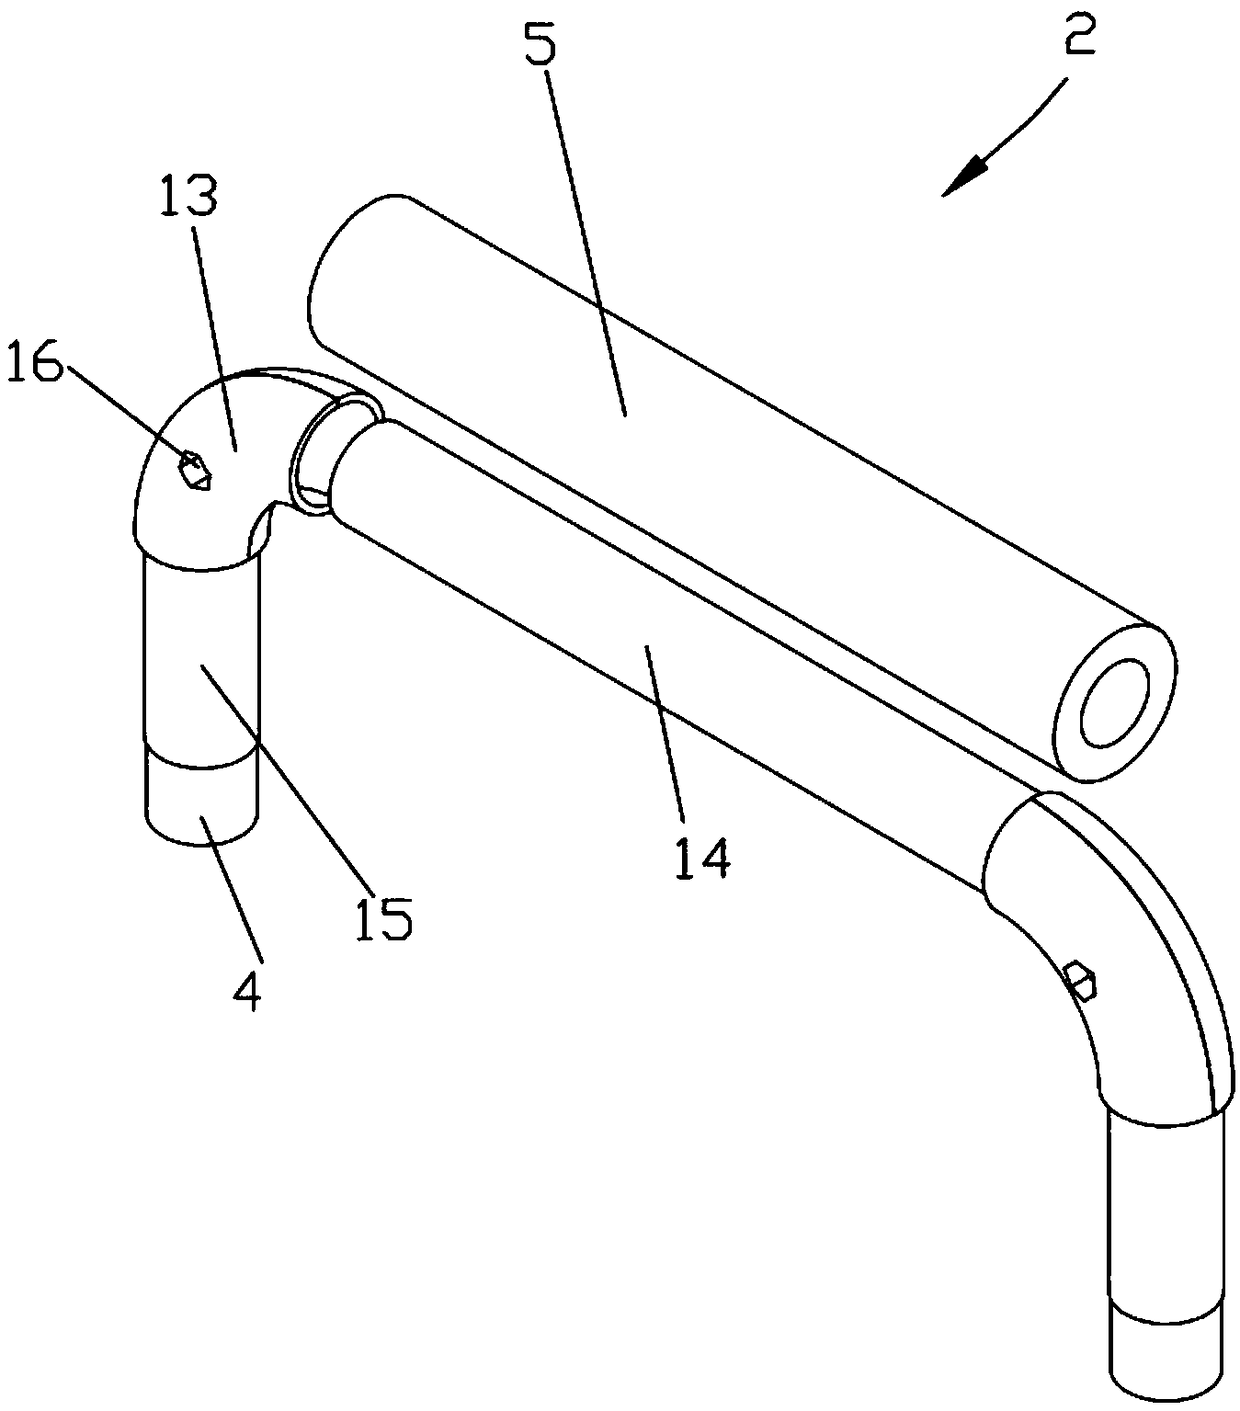 Position fixation device for preoperative position fixation of patients accepting hip joint and knee joint operations and using method of position fixation device